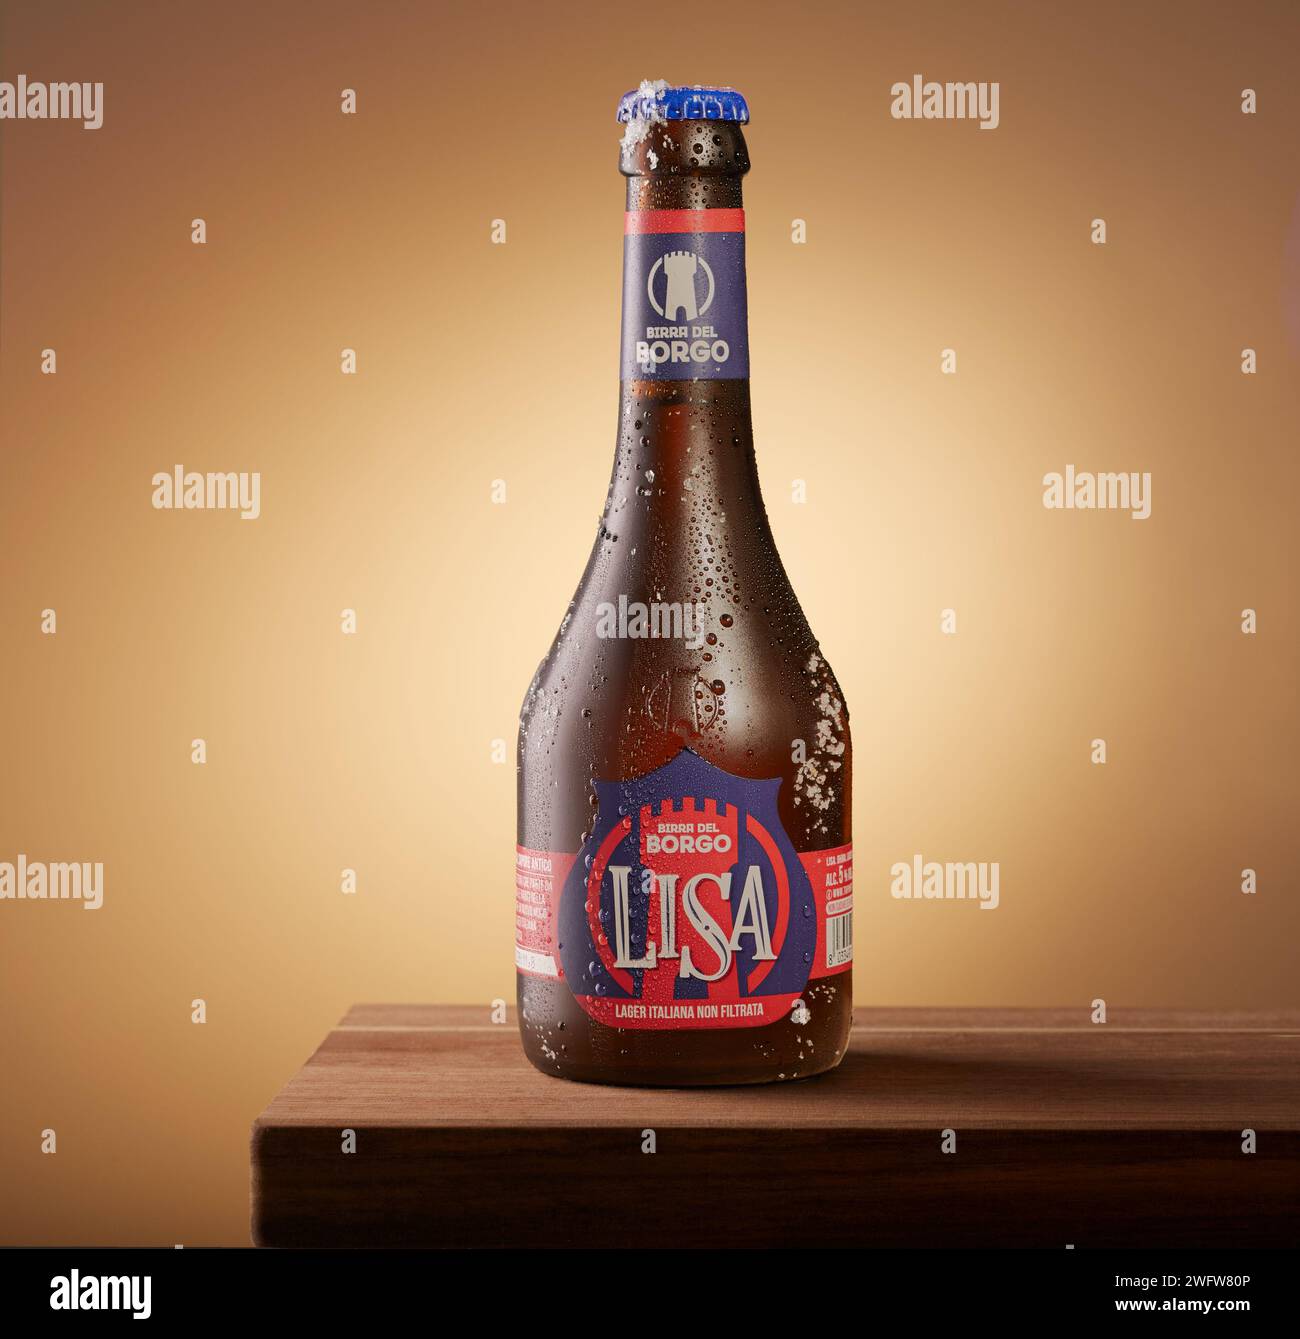 Mansfield,Nottingham,United Kingdom,31st January 2024:Studio product image of a bottle of Borgo Lisa lager,which is an Italian brewed Lager. Stock Photo